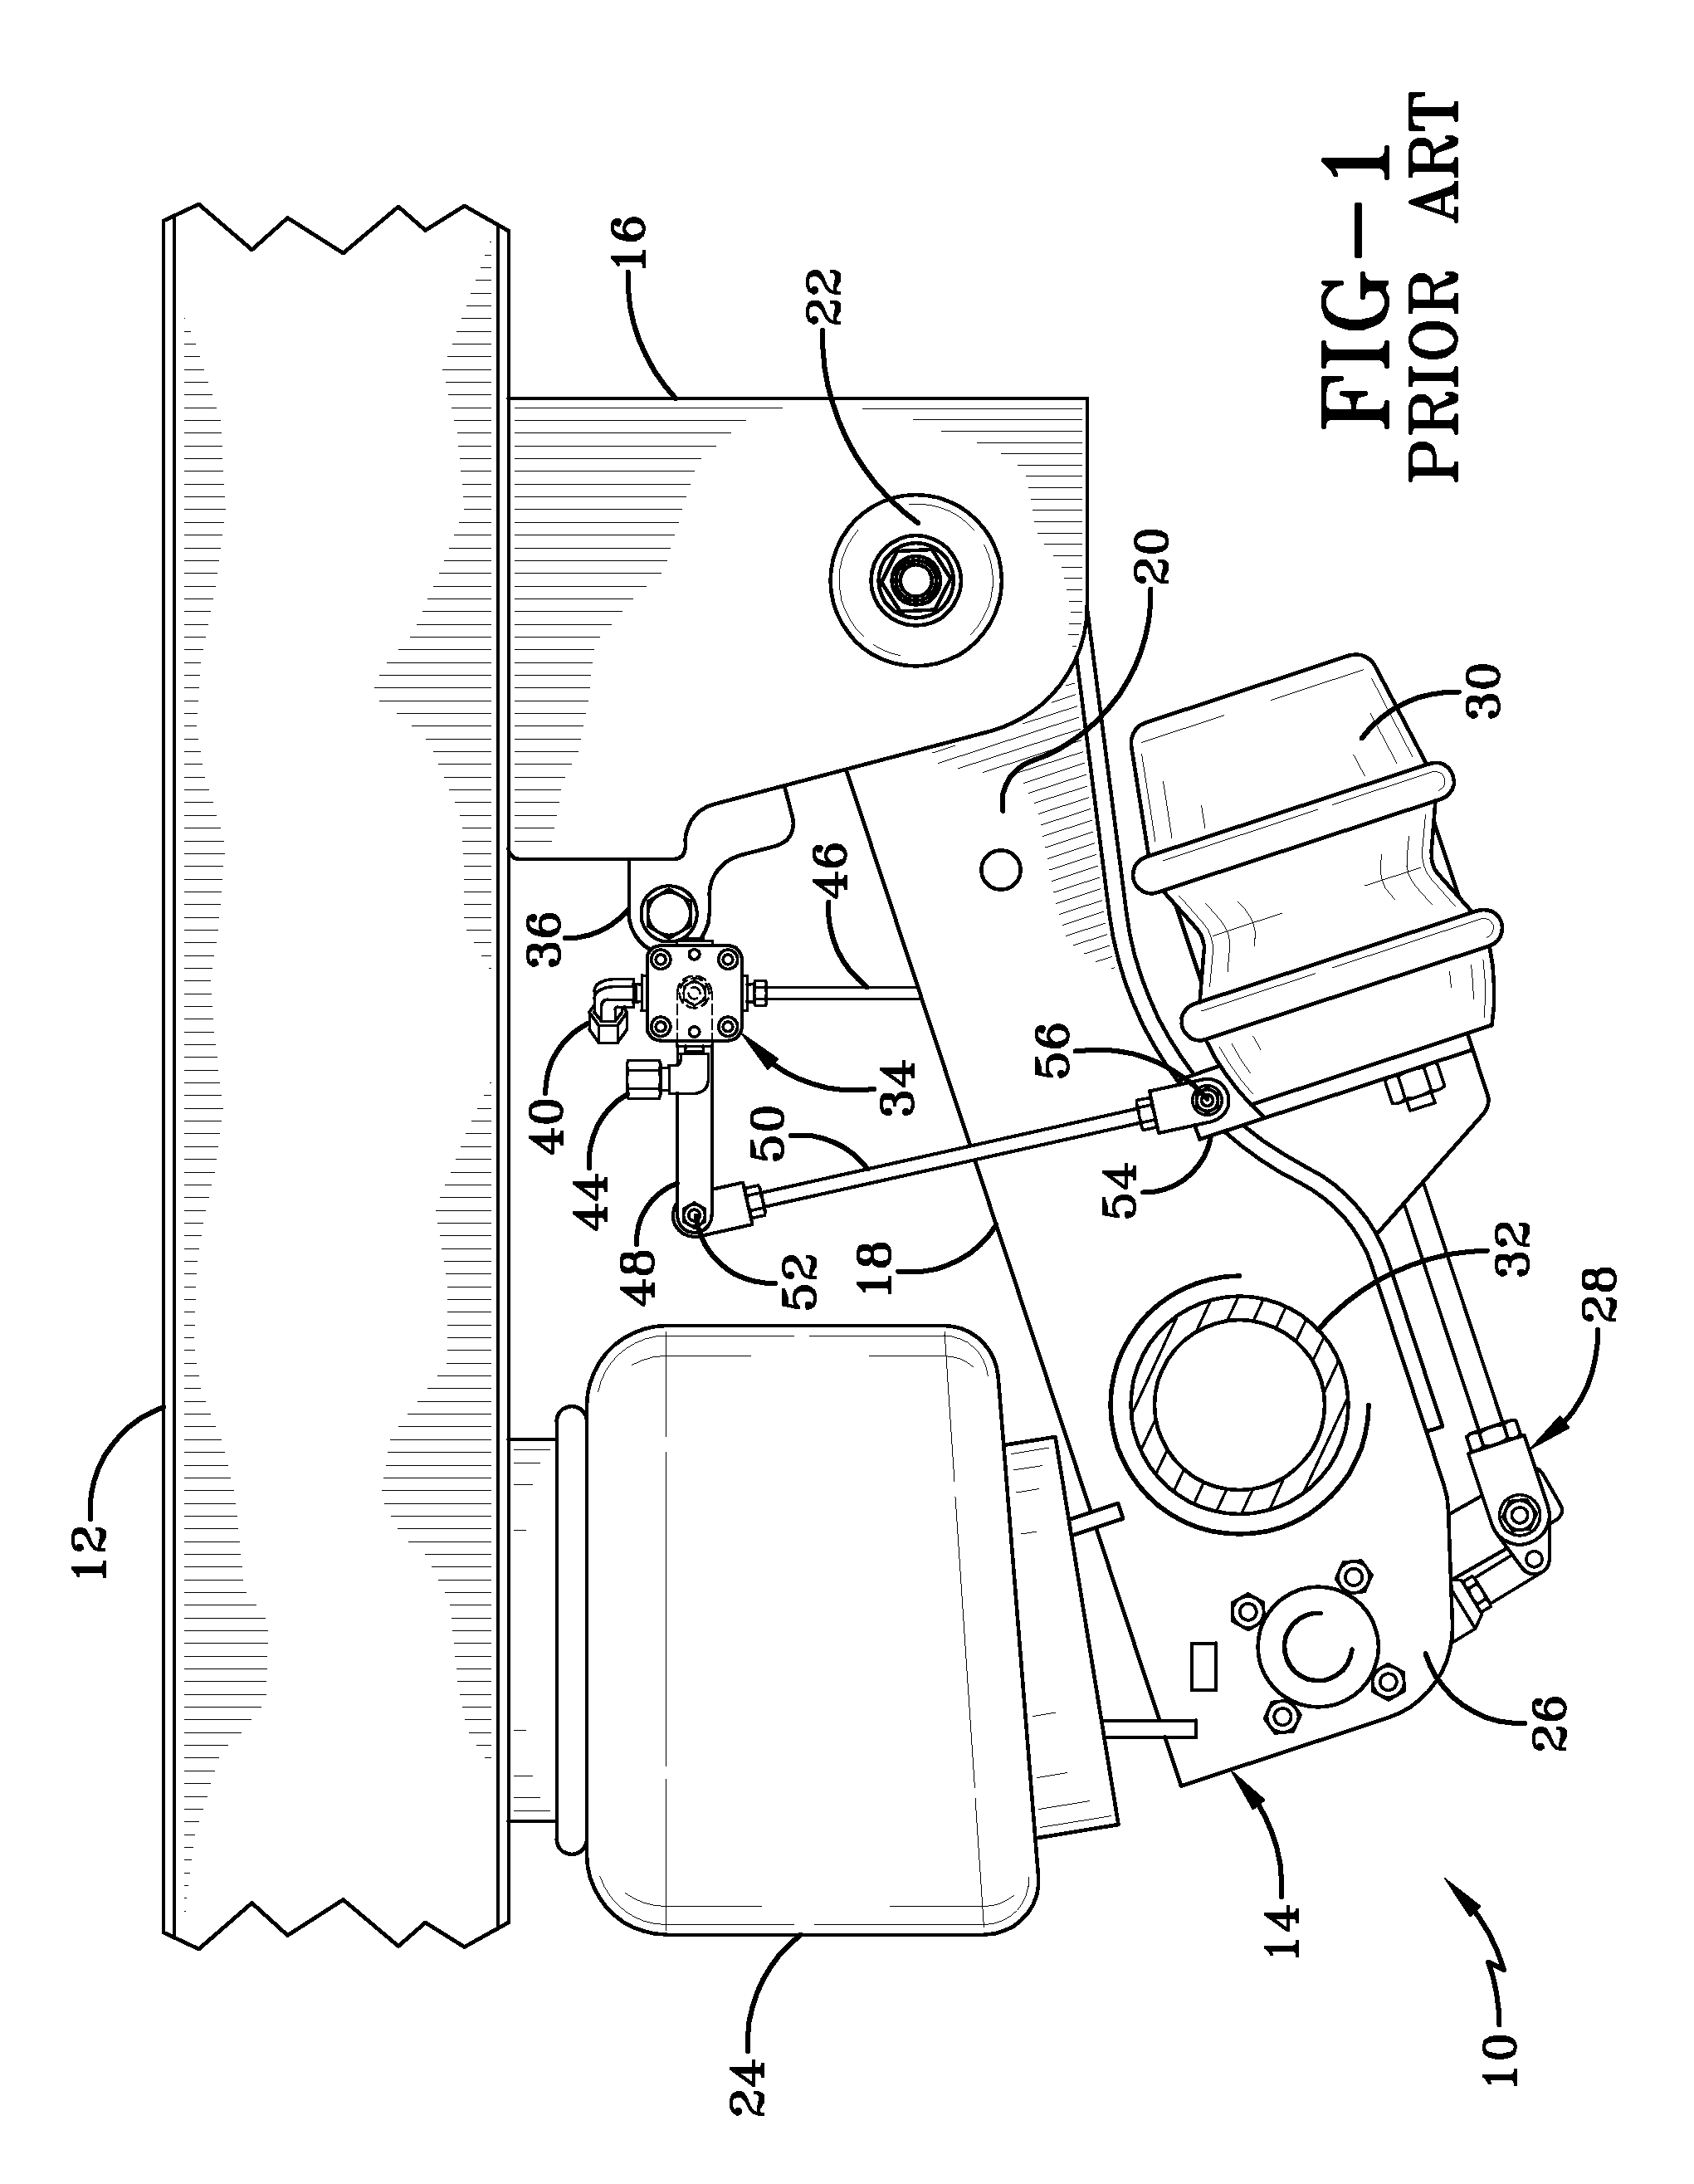 Multi-stage height control valve including position sensitive pilot signal and pressure boost for vehicle air springs